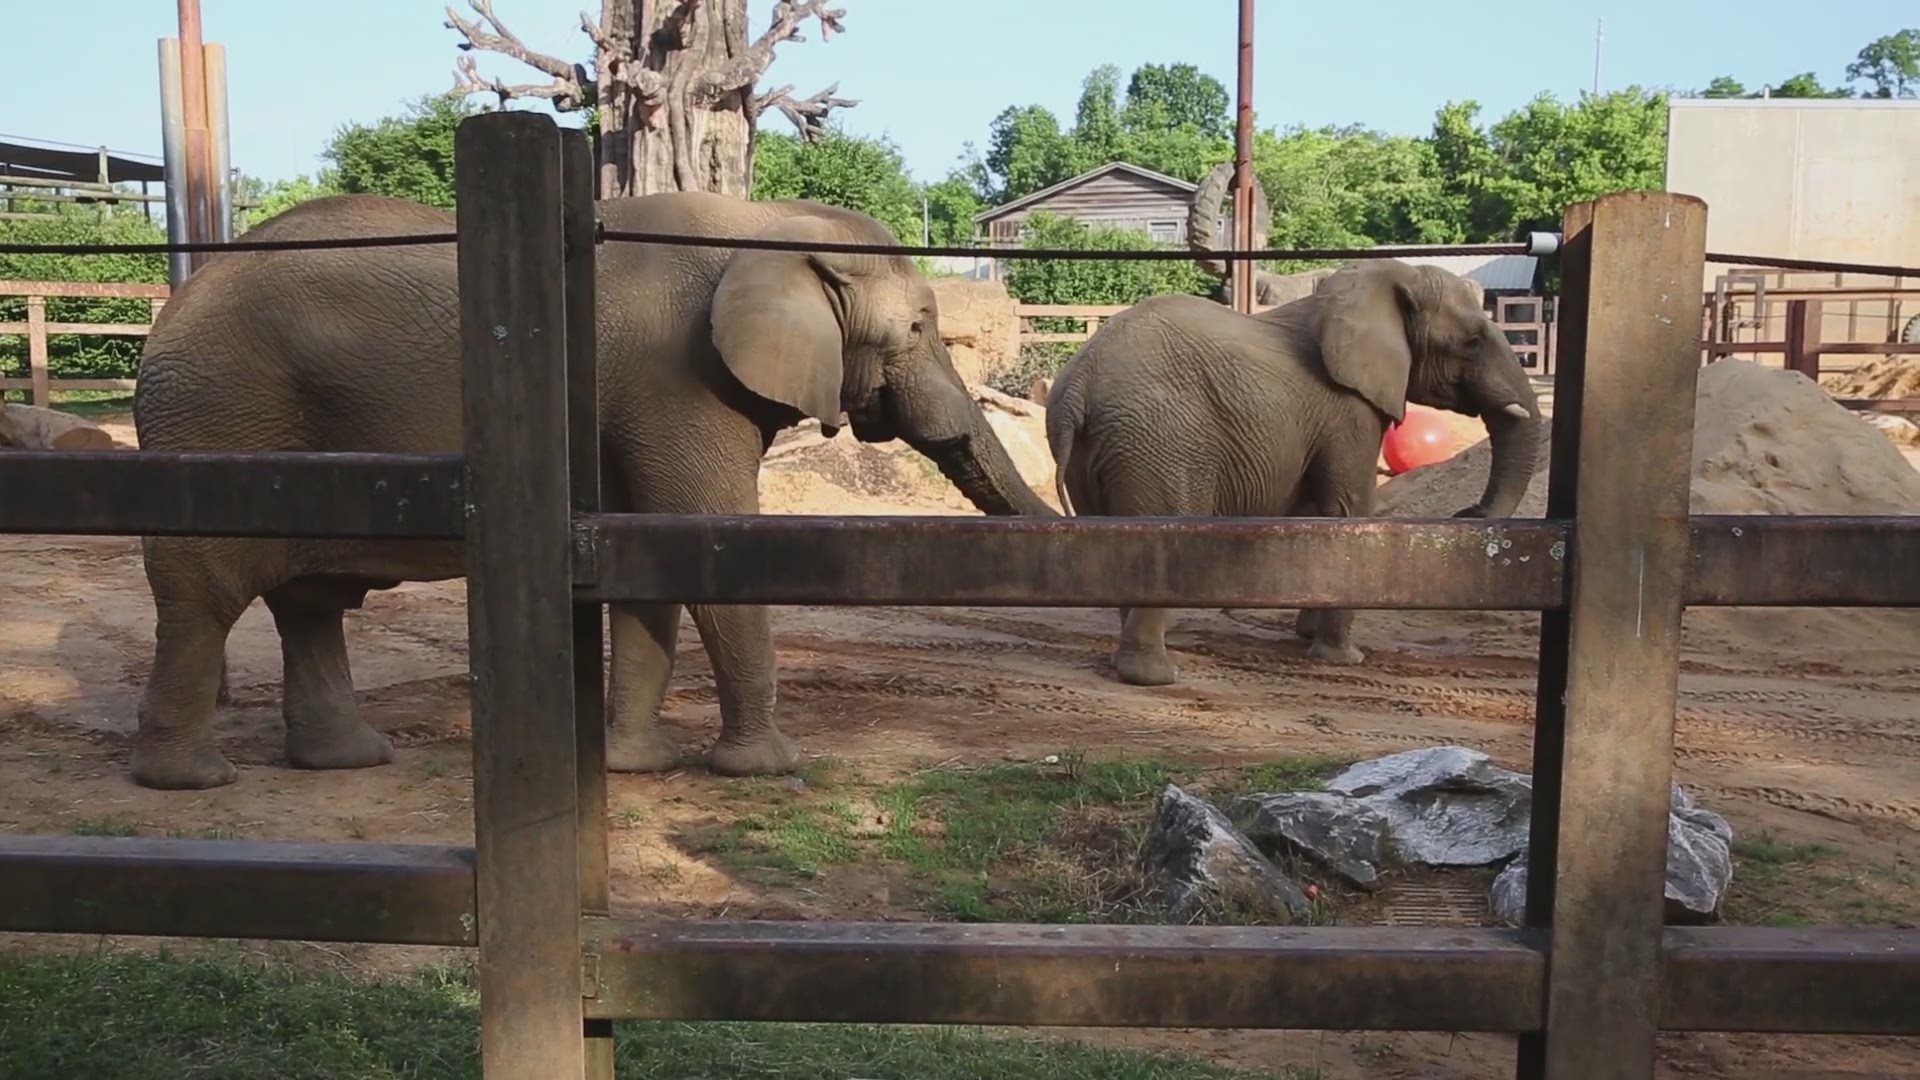 Zoo Knoxville's African elephants Tonka and Edie are now meeting for play dates and zoo staff are excited about the implications of their successful introduction.  Since their initial meeting, the pair have enjoyed regular play sessions where the very act